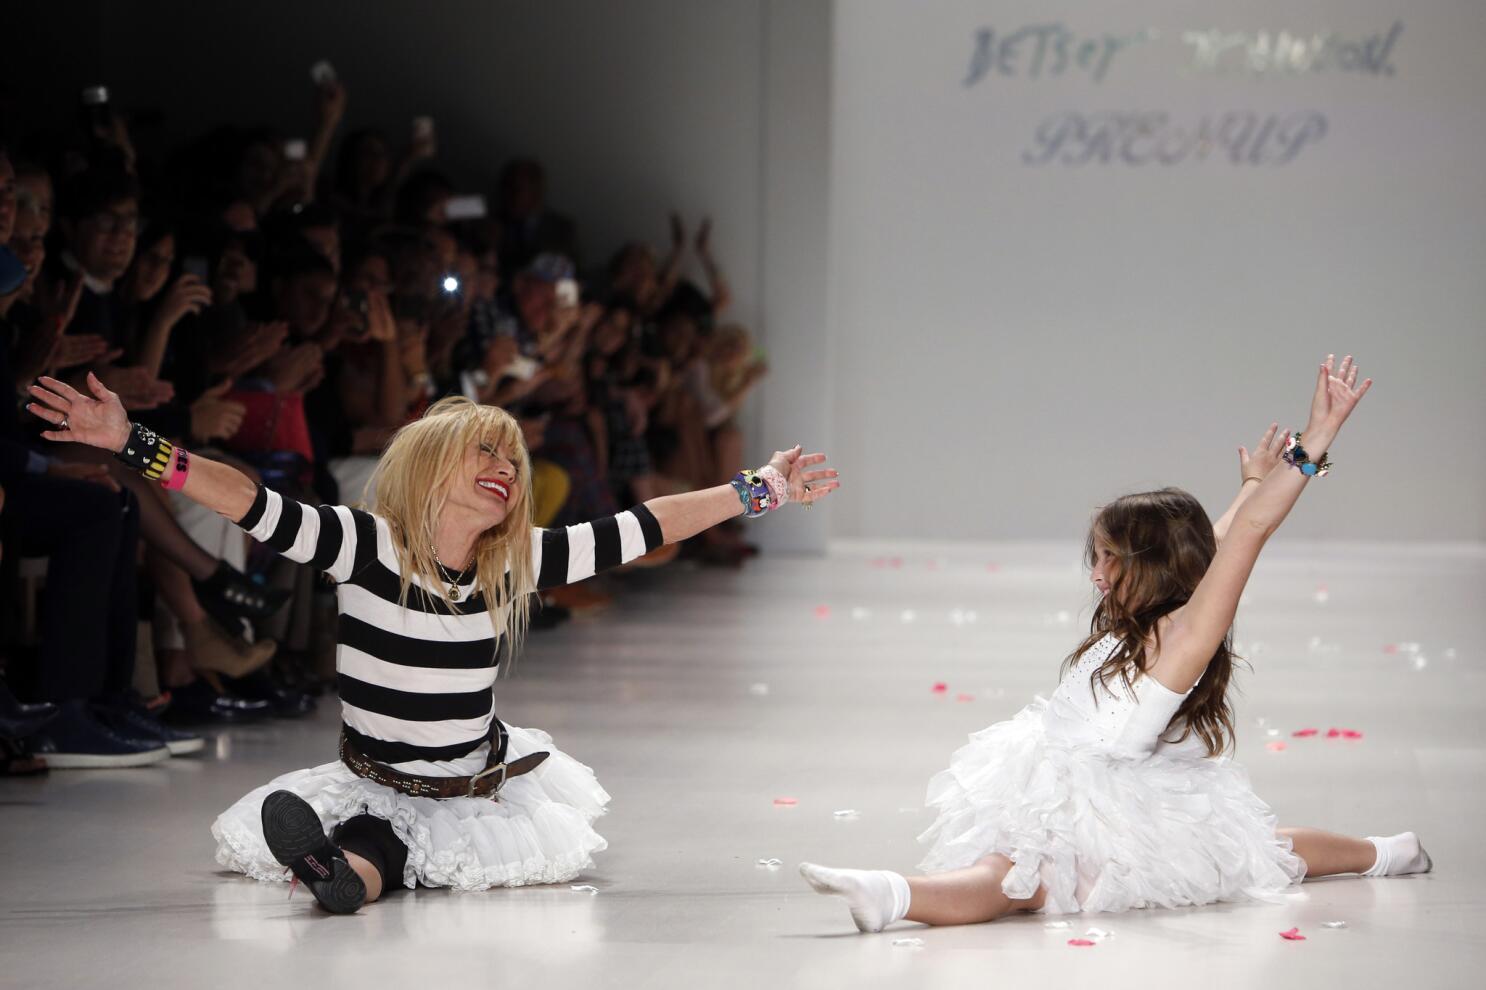 Betsey Johnson to receive CFDA lifetime award - Los Angeles Times